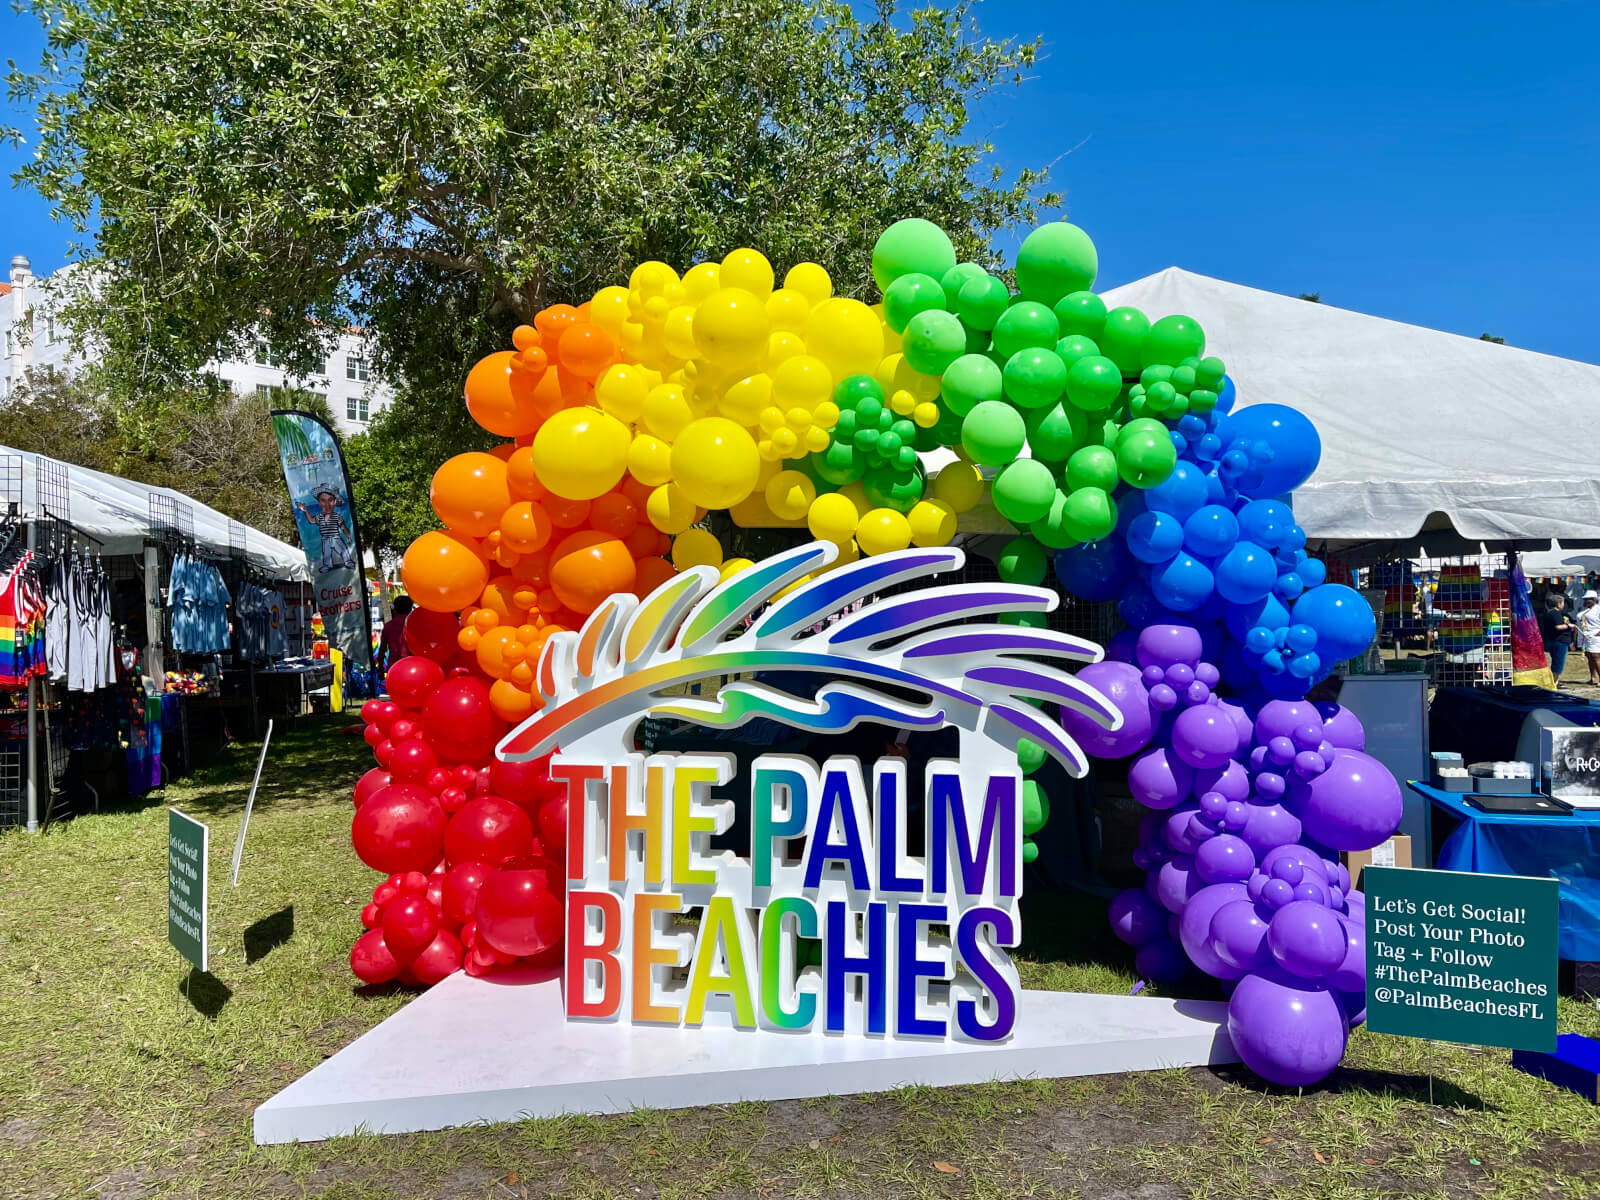 The Palm Beaches logo surrounded by ballons